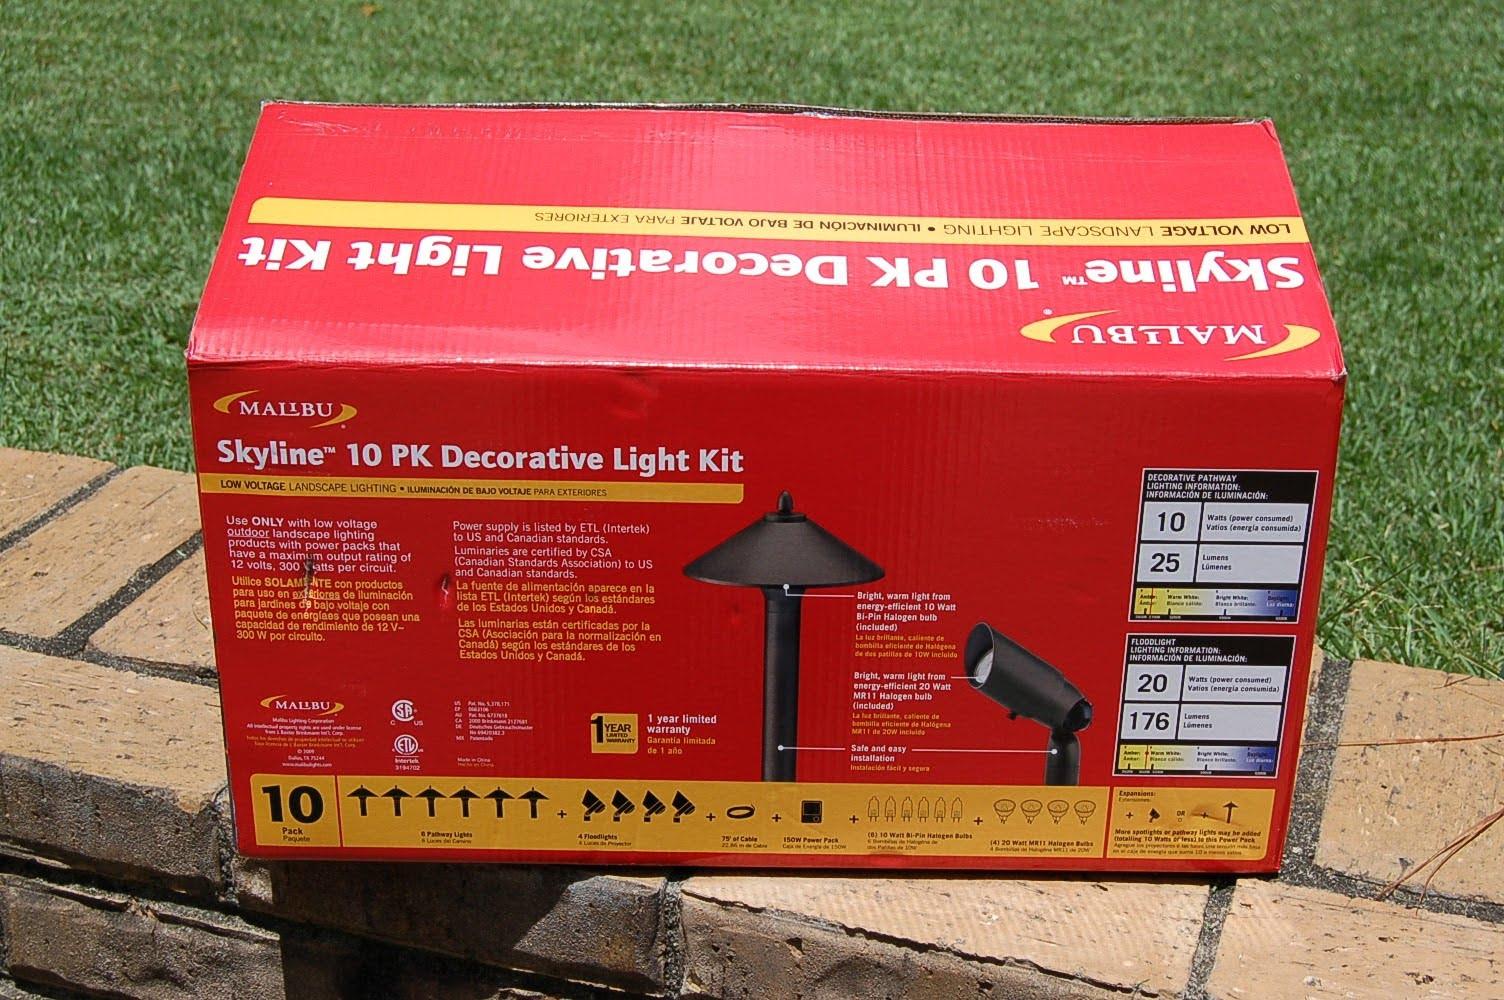 Discontinued Malibu Landscape Lights
 Treadster Low Voltage Outdoor Lighting Project